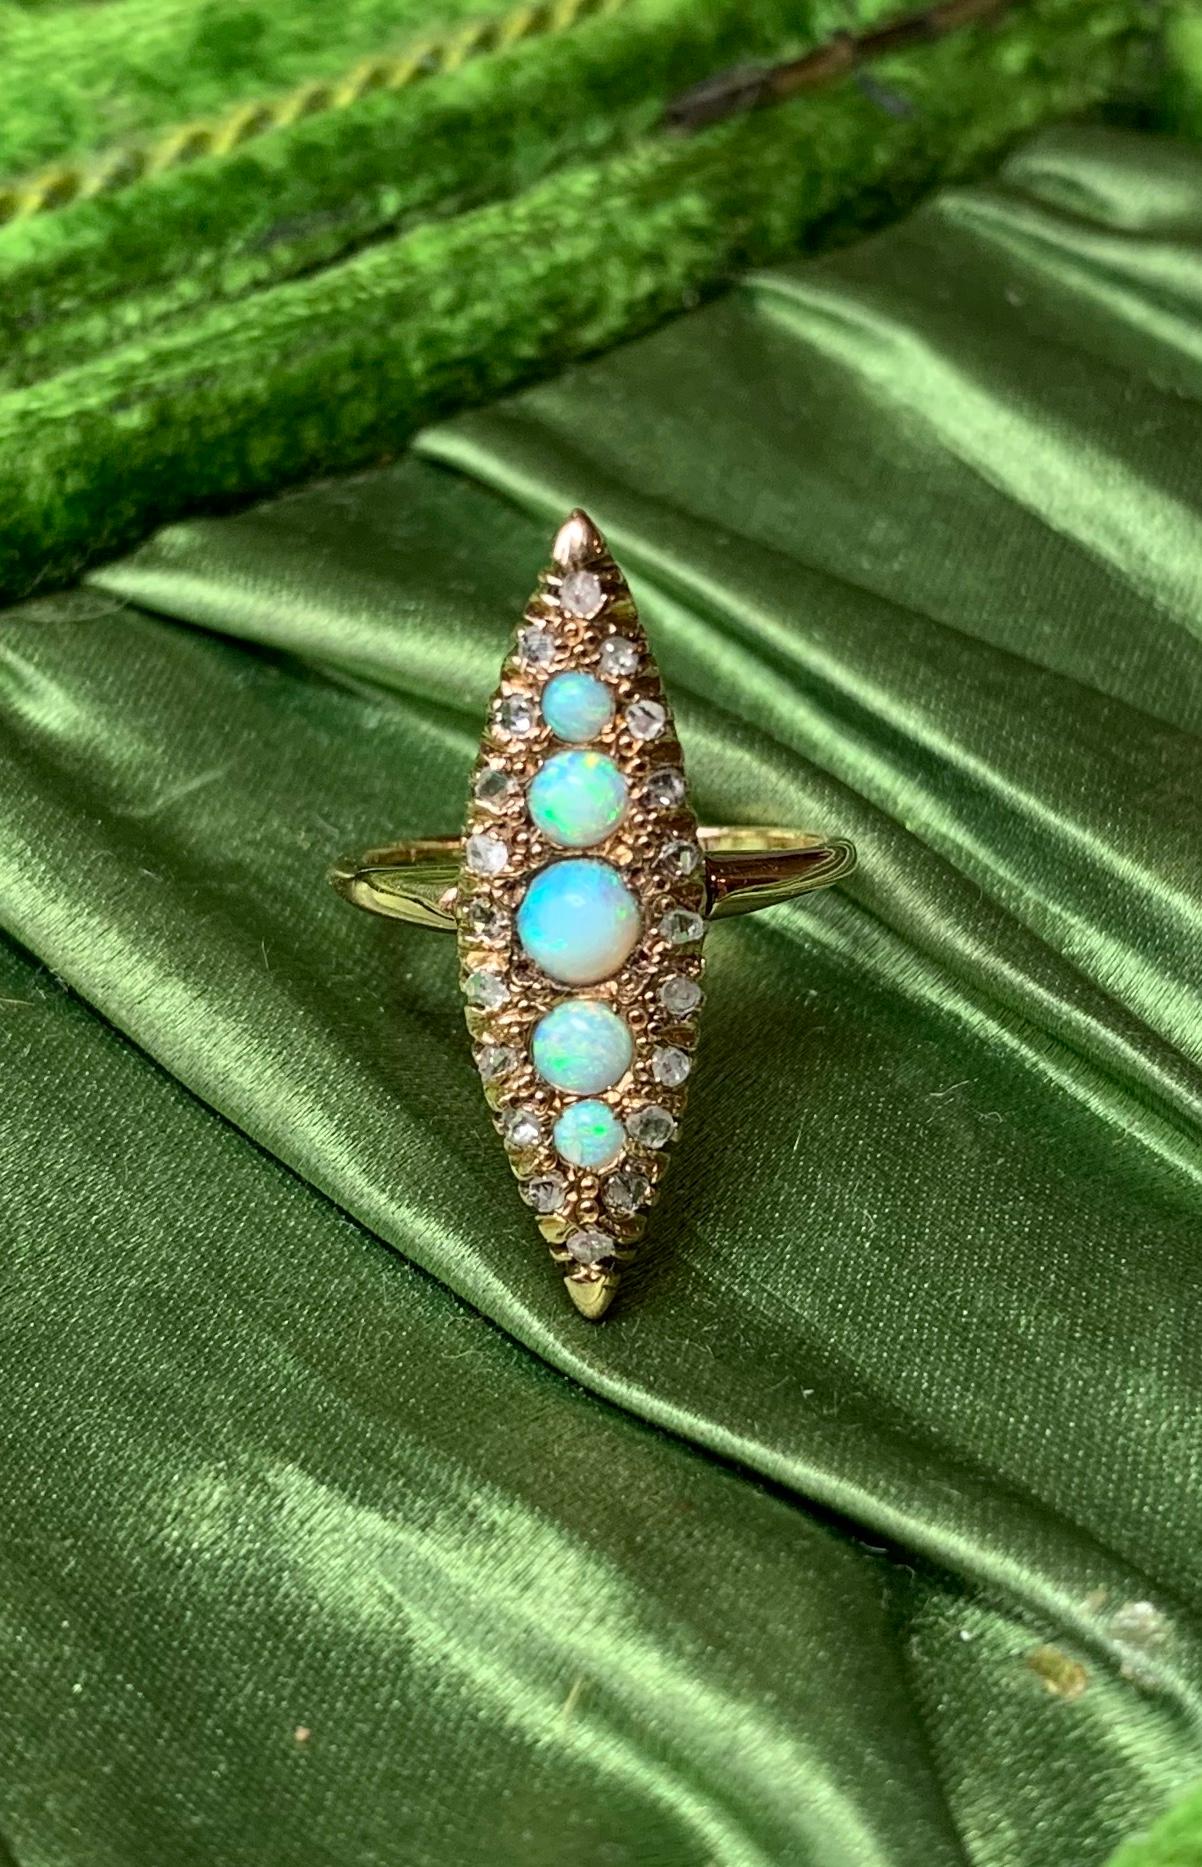 An Antique Victorian - Edwardian Ring with five gorgeous natural round Opals of incredible color and stunning beauty. The five Opal gems are surrounded by sparkling antique Rose Cut Diamonds. This is the combination everyone dreams of!  The jewels